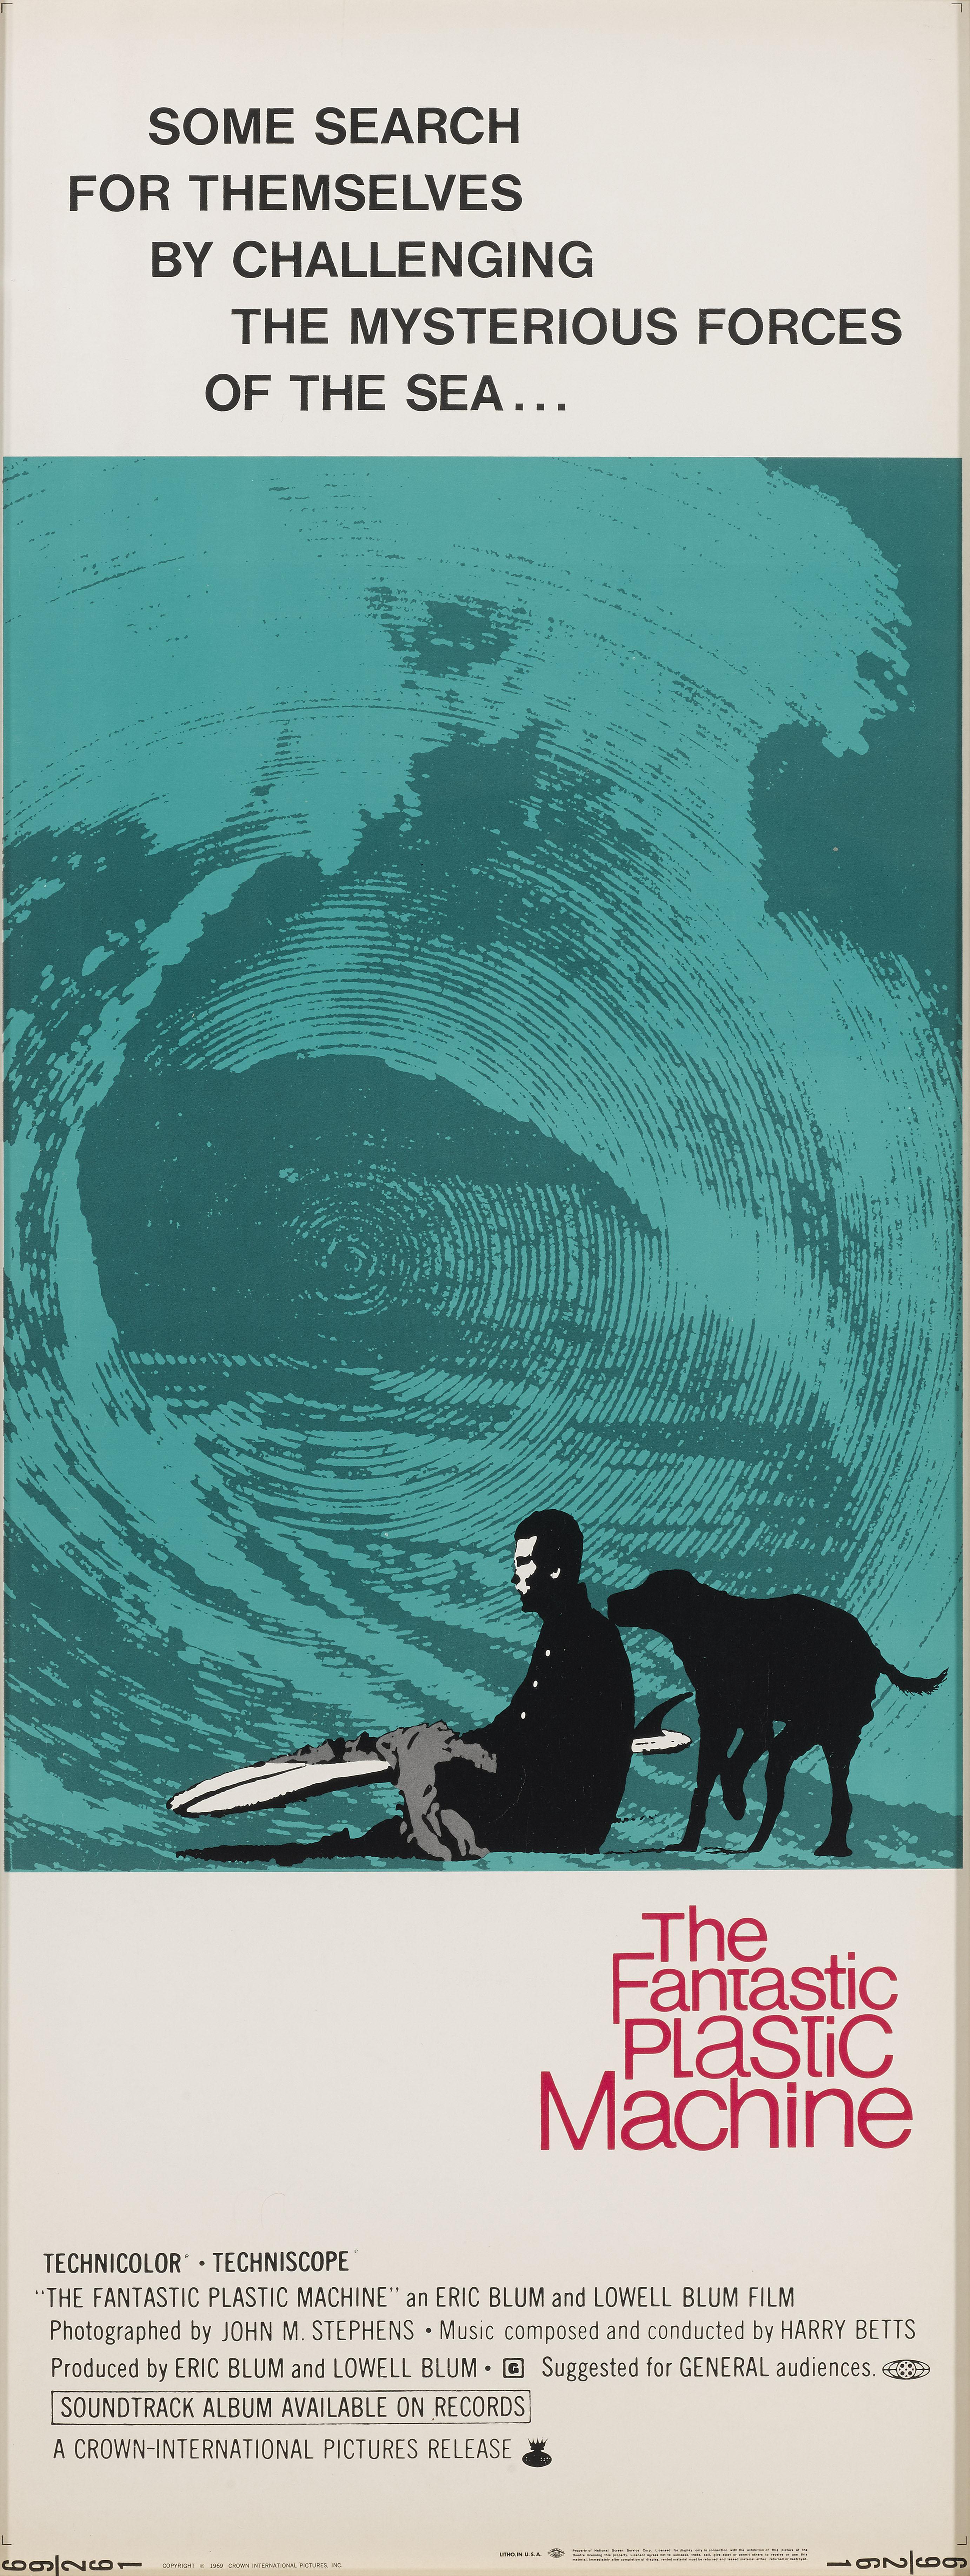 Original US film poster for the 1969 documentary following a group of surfers.
This film starred Skip Frye, Mike Purpus and Steve Bigler. It was directed by Eric Blum and Lowell Blum.
This poster is unfolded conservation paper backed and